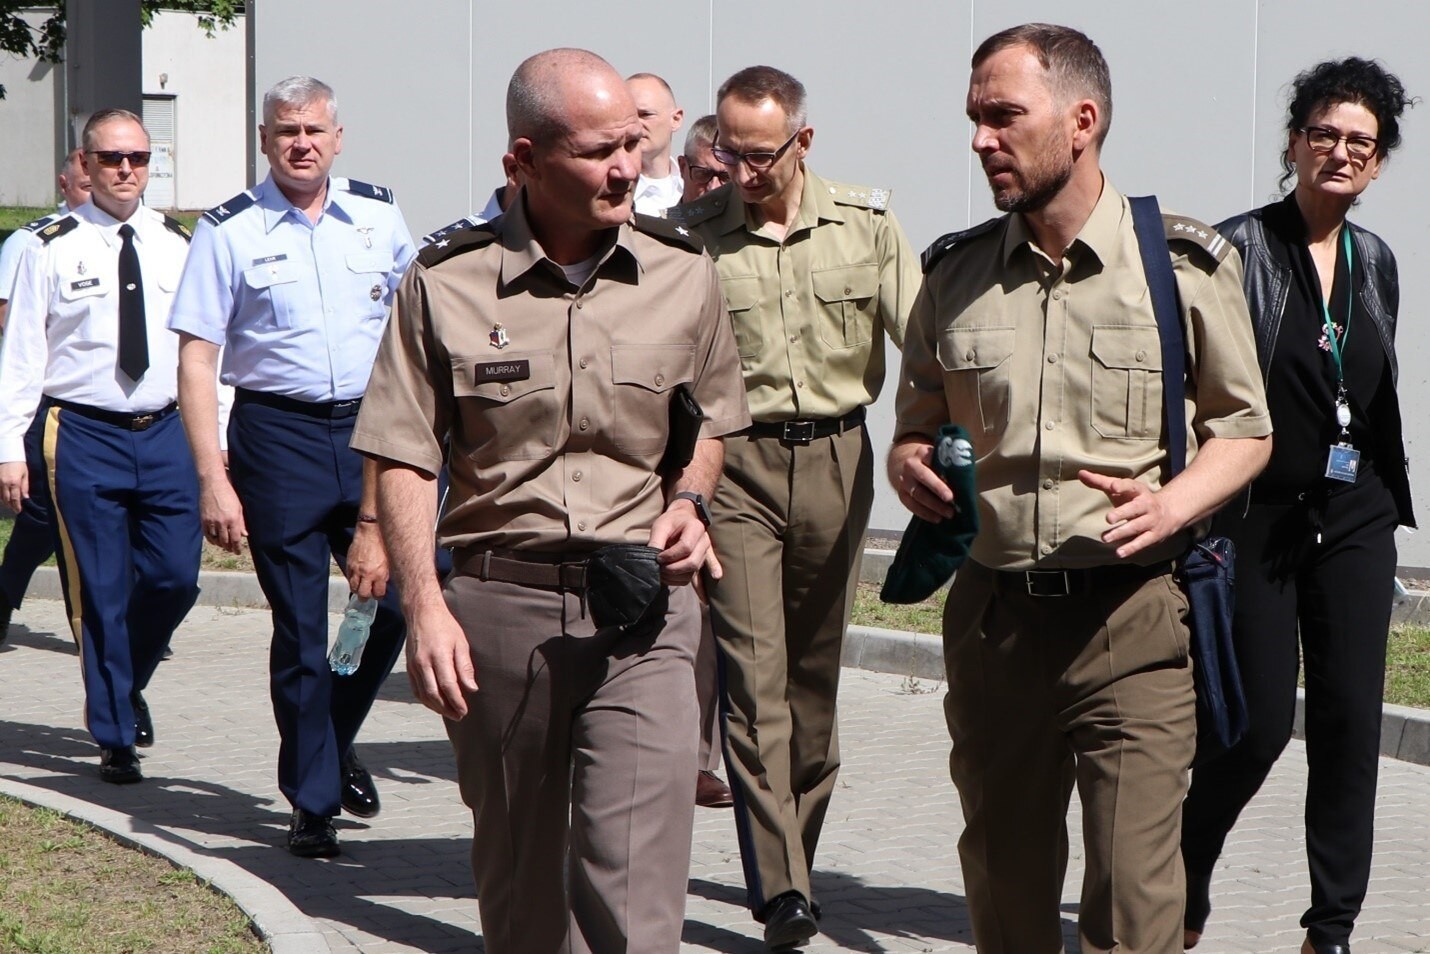 Polish Col. Artur Bachta, WIM Chief Operating Officer (right), shares with U.S. Army Europe and Africa Command Surgeon Brig. Gen. Clinton Murray the trauma center capabilities at the Polish Military Institute of Medicine in Warsaw, Poland, 29 July, 2022. (Photo Credit: U.S. Army Sgt. April Benson)